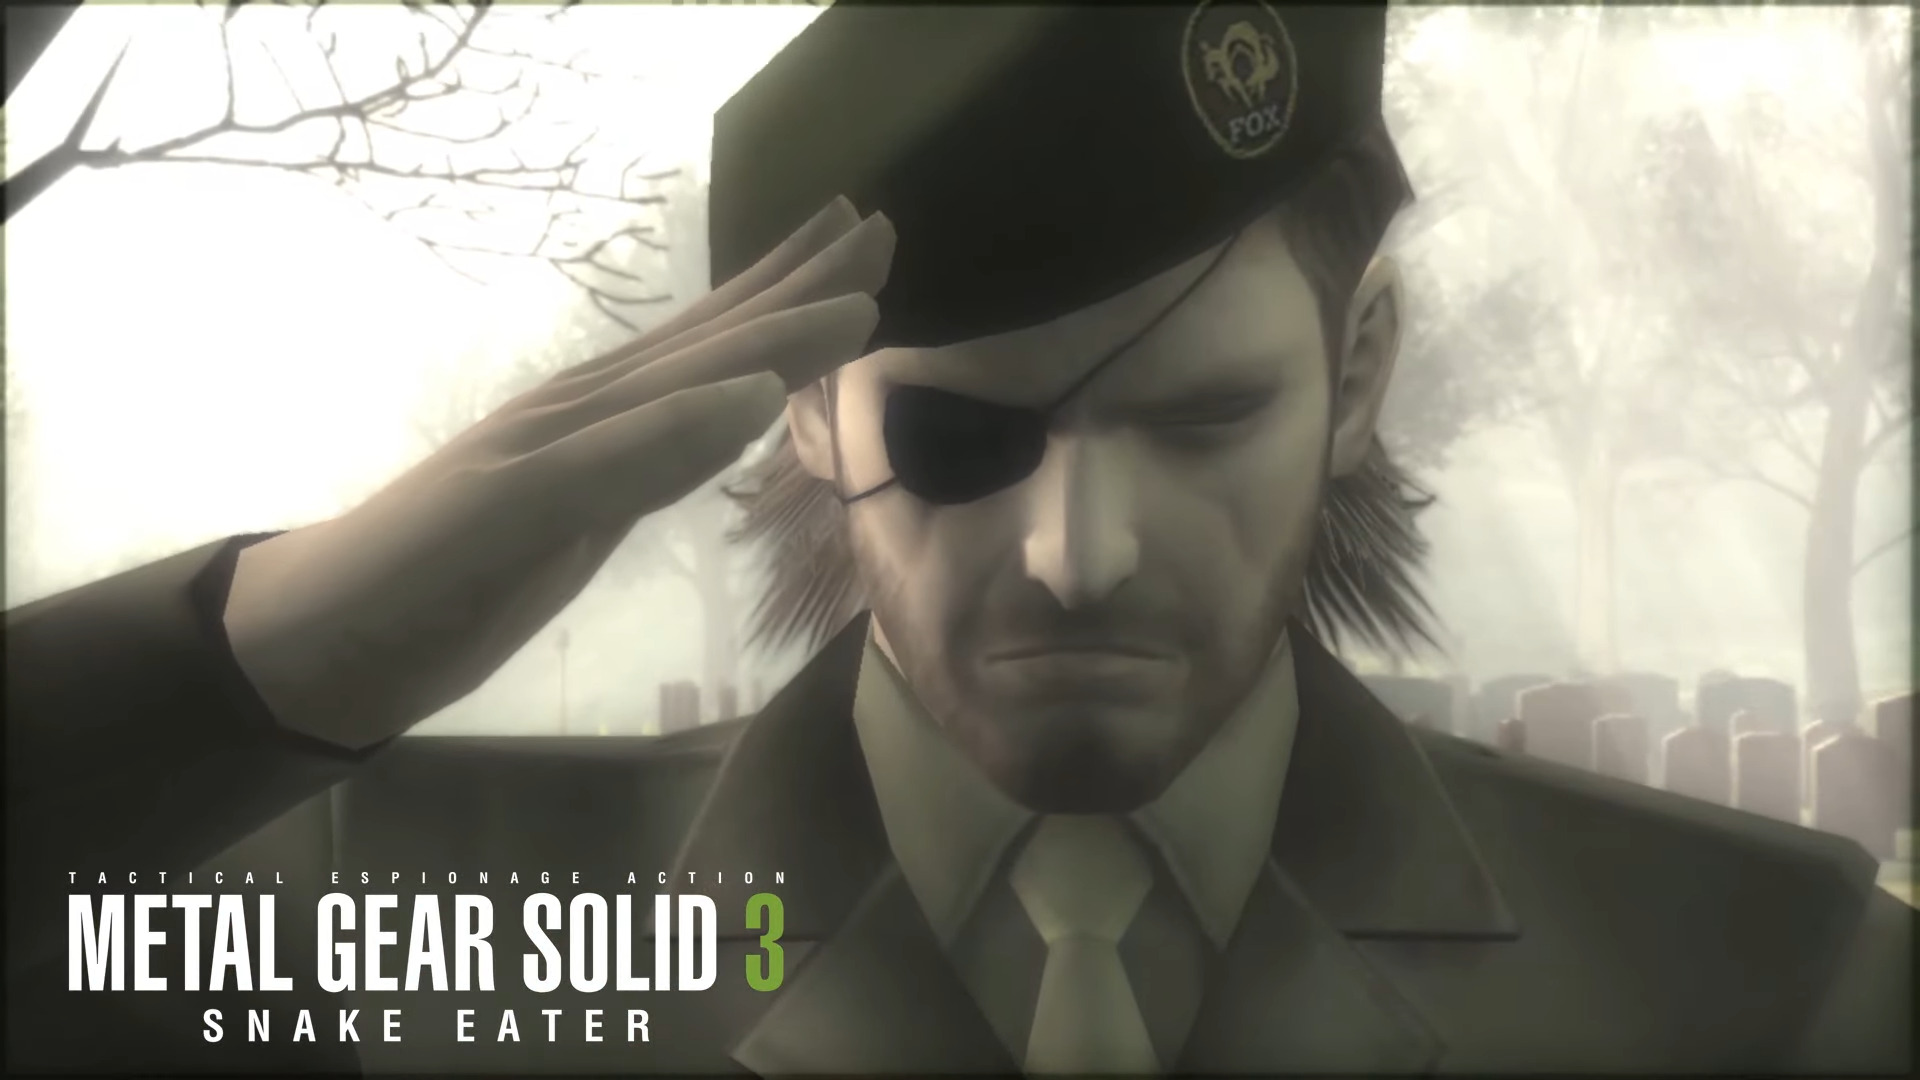 A screenshot from Metal Gear Solid 3 showing Snake saluting with his eyes shut